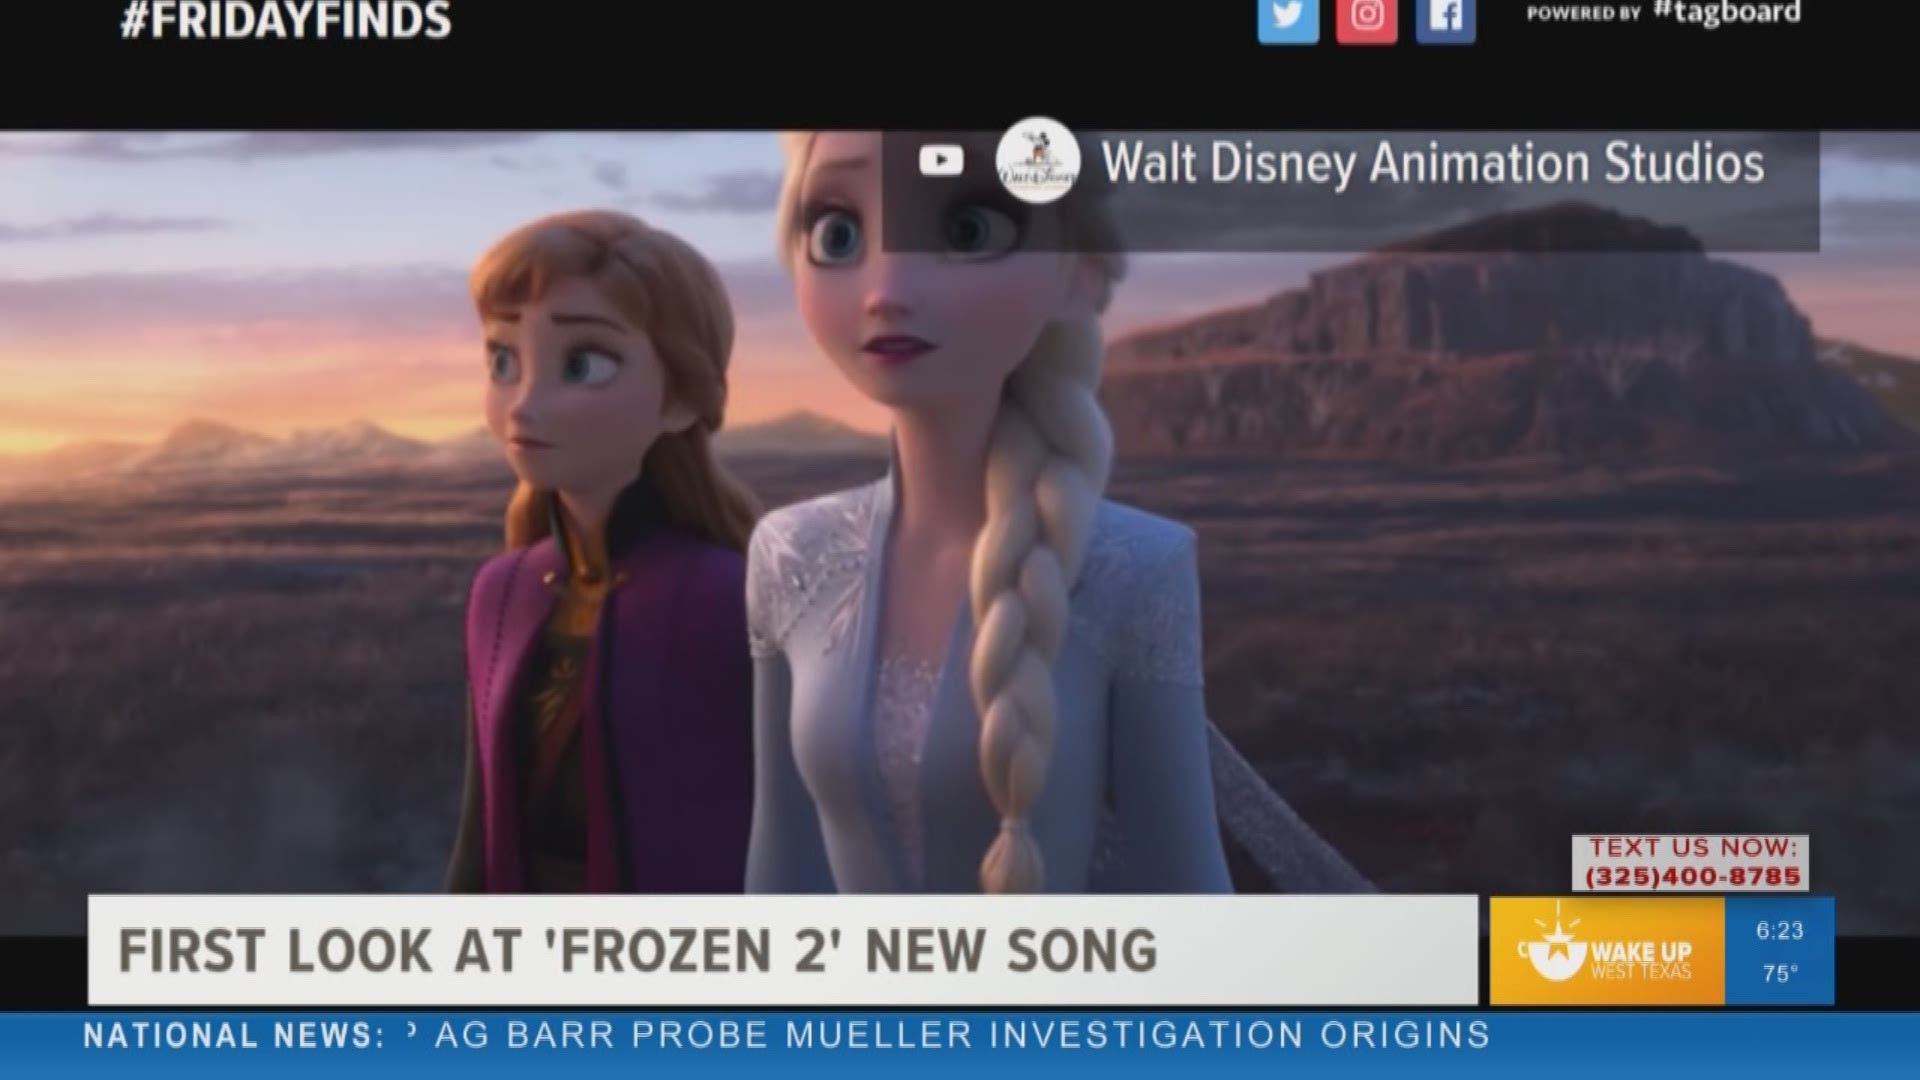 Our Malik Mingo shared what people said on social media about a new song released off of the "Frozen 2" soundtrack.